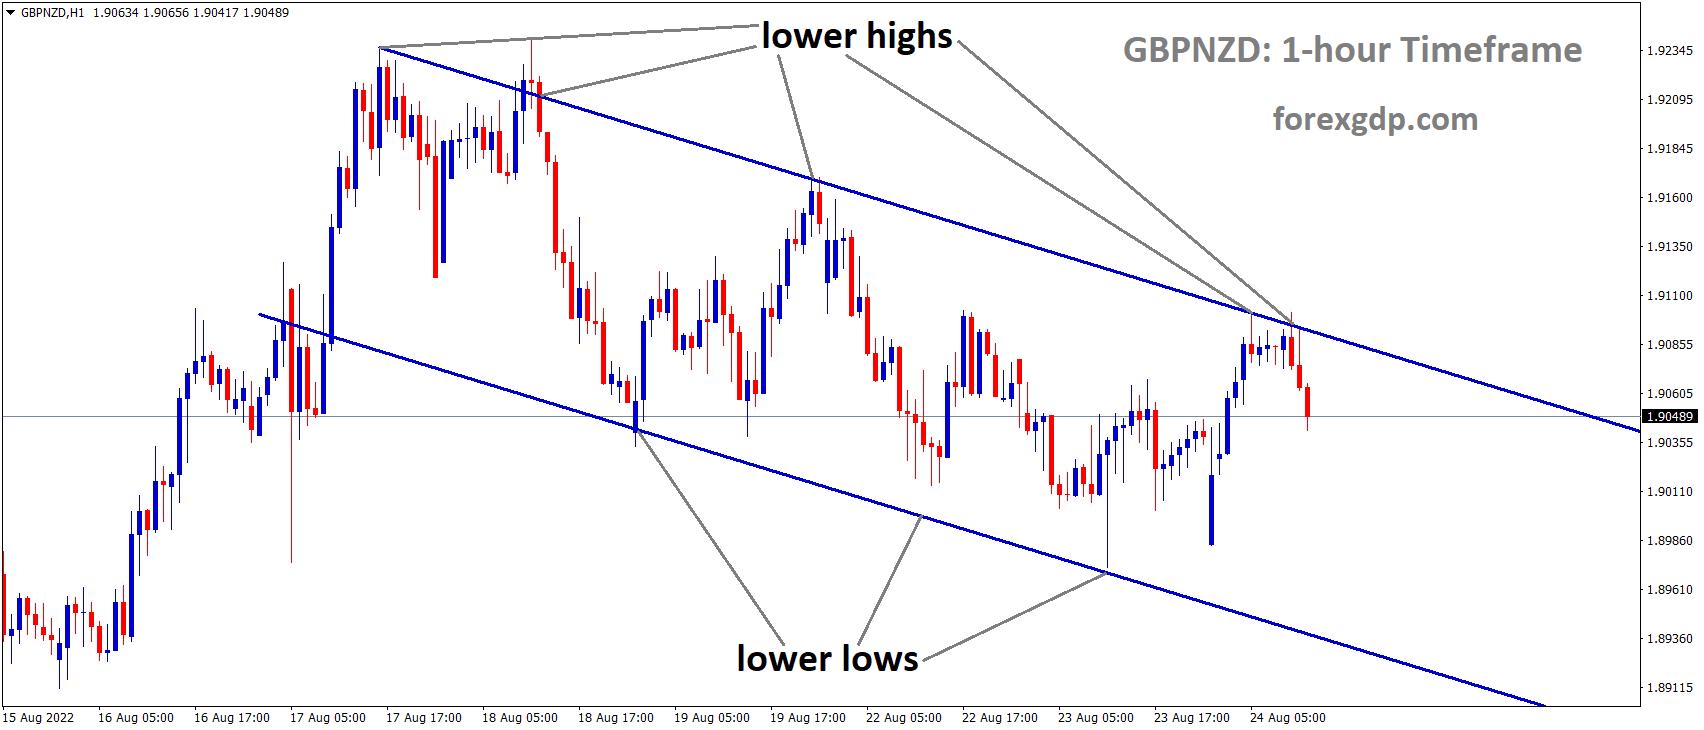 GBPNZD is moving in the descending channel and the market has fallen from the lower high area of the channel